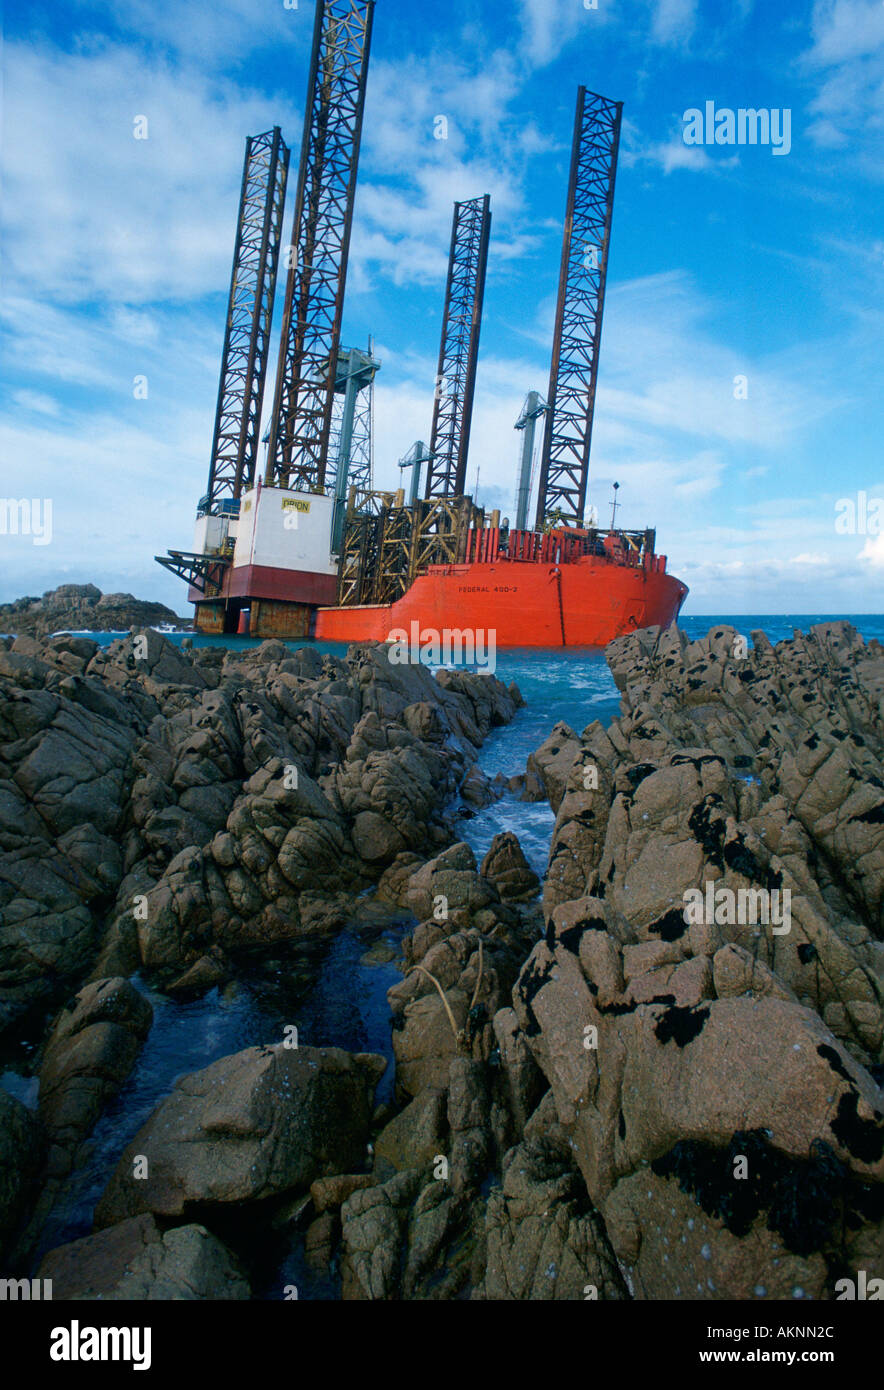 Oil rig Orion aground in Grandes Rocques Bay Guernsey Channel Islands Stock Photo